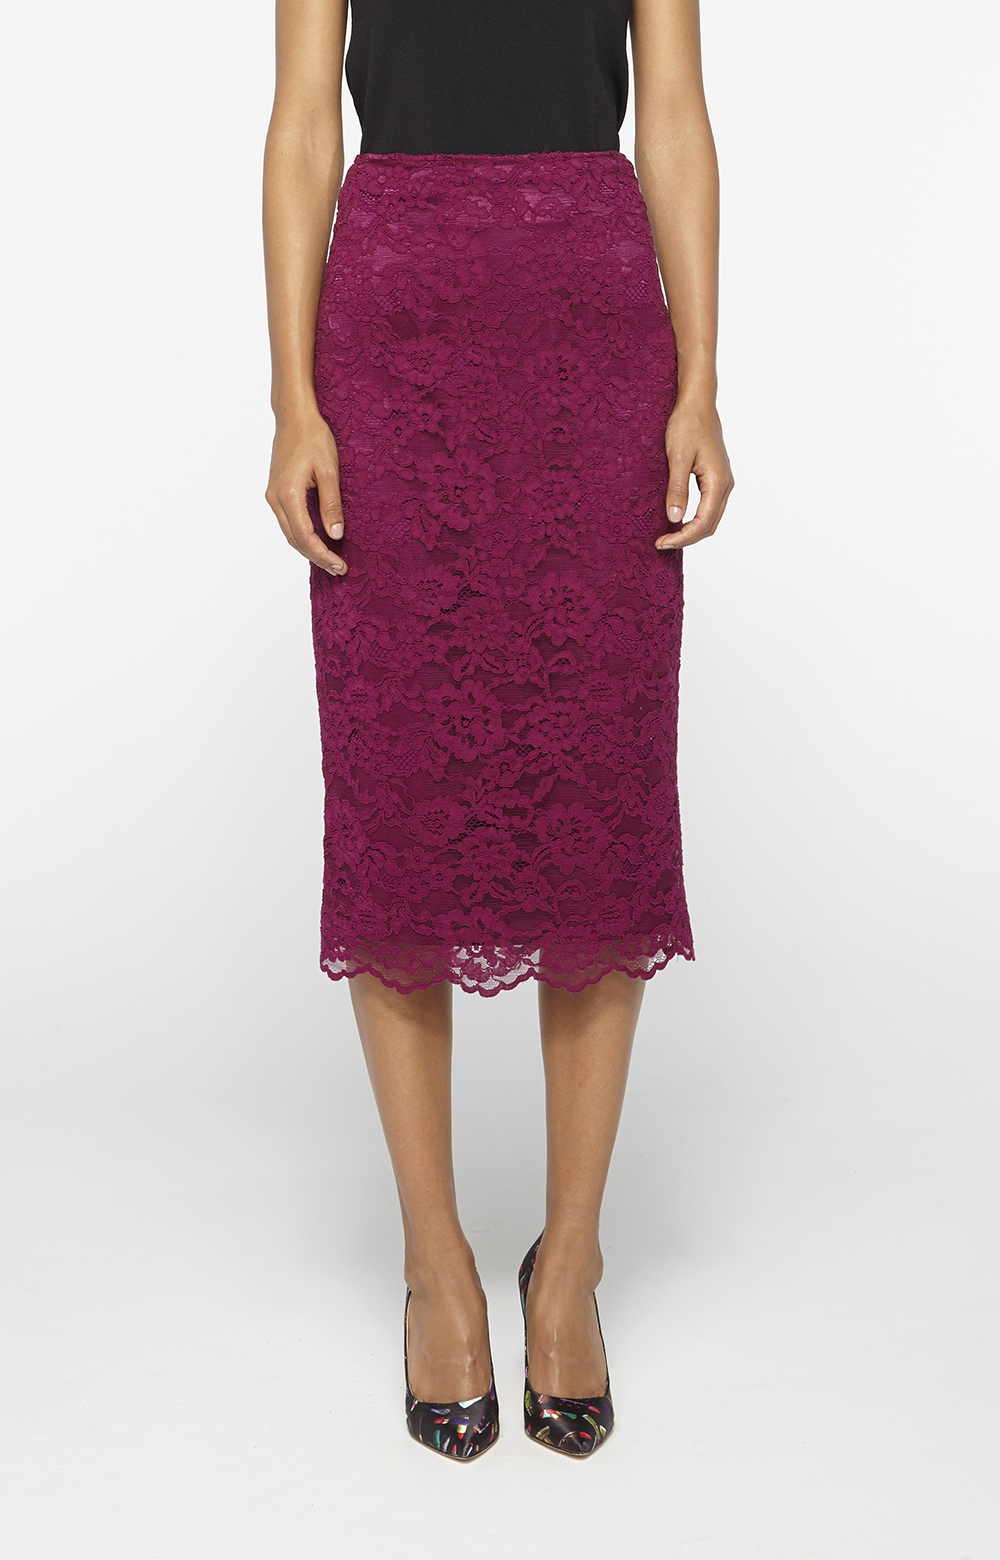 Lyst Nicole Miller Floral Lace Pencil Skirt In Purple